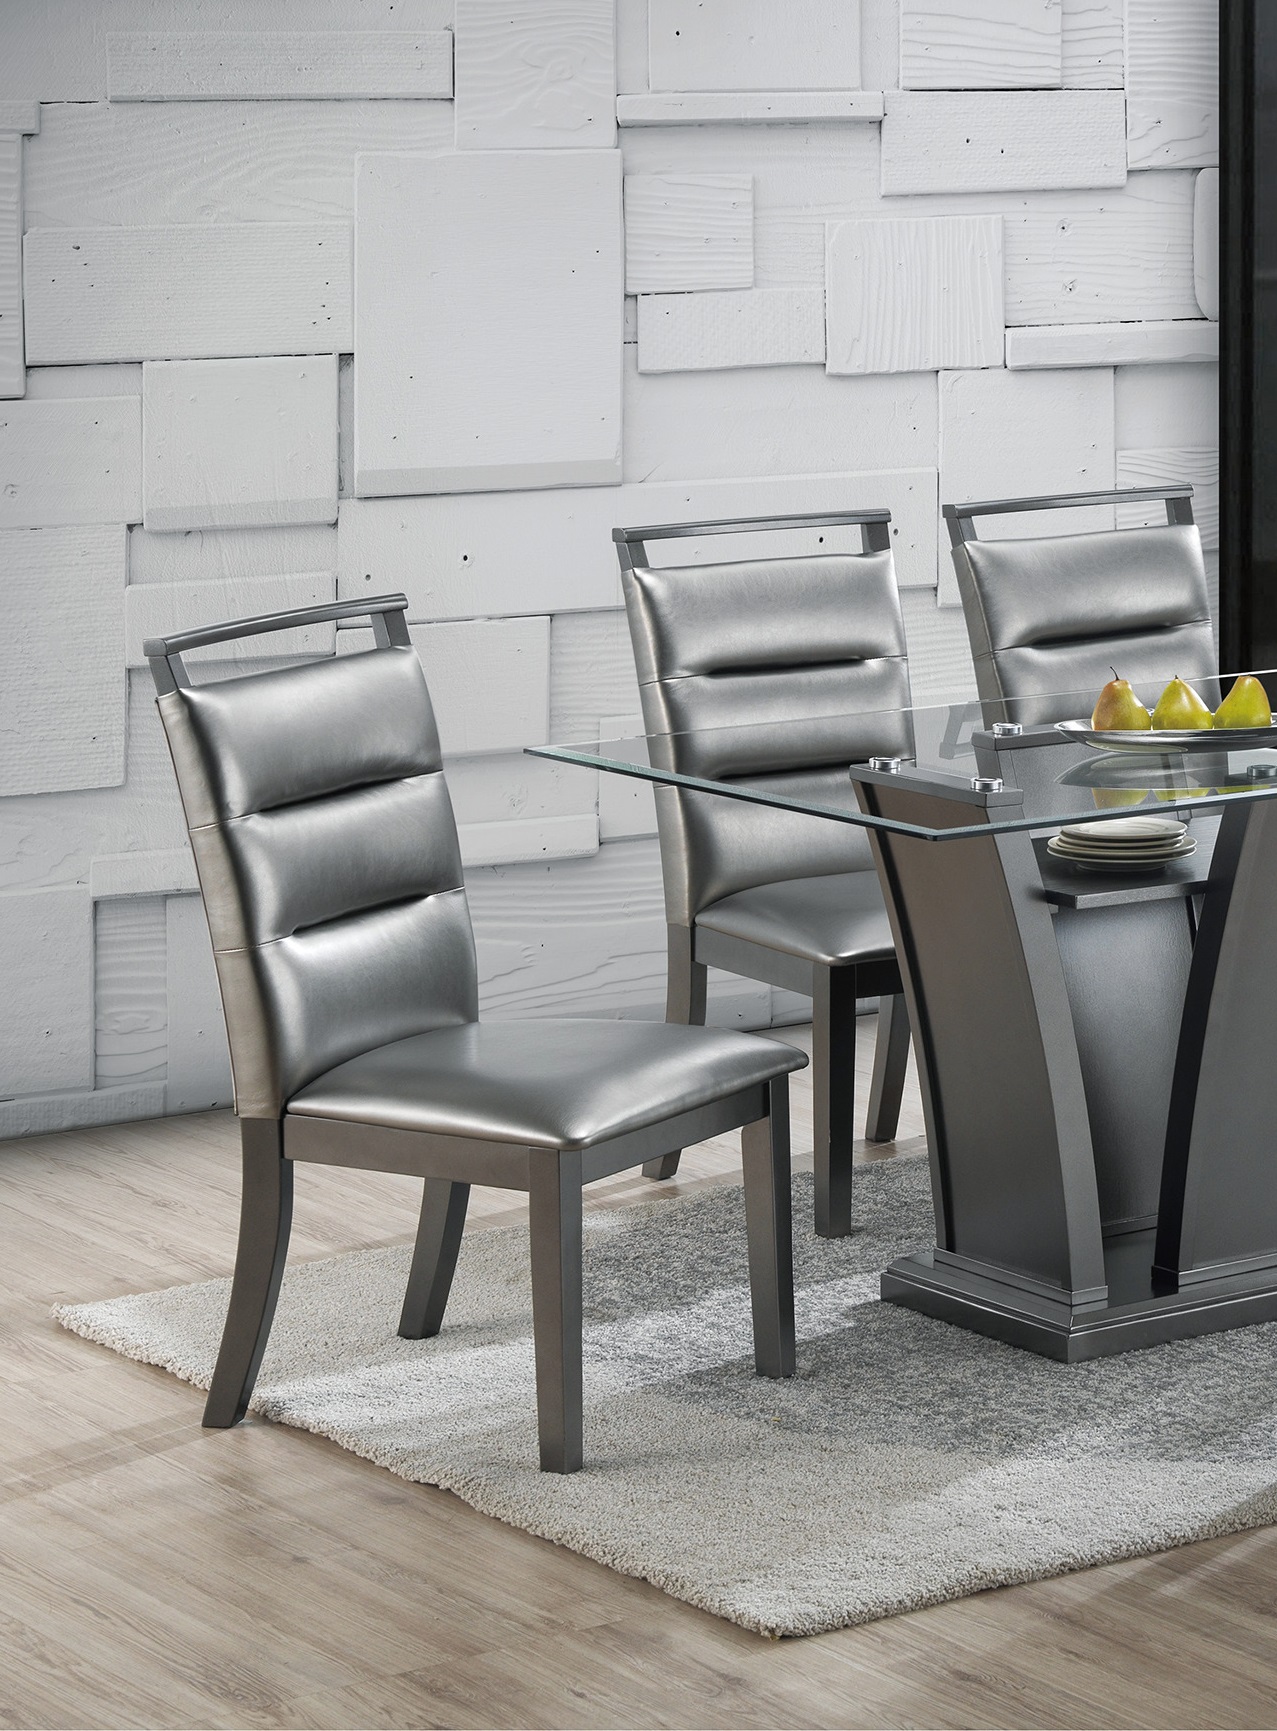 Metallic Grey Faux Leather Foam Cushion 2x Side Chairs Contemporary Dining-Boyel Living